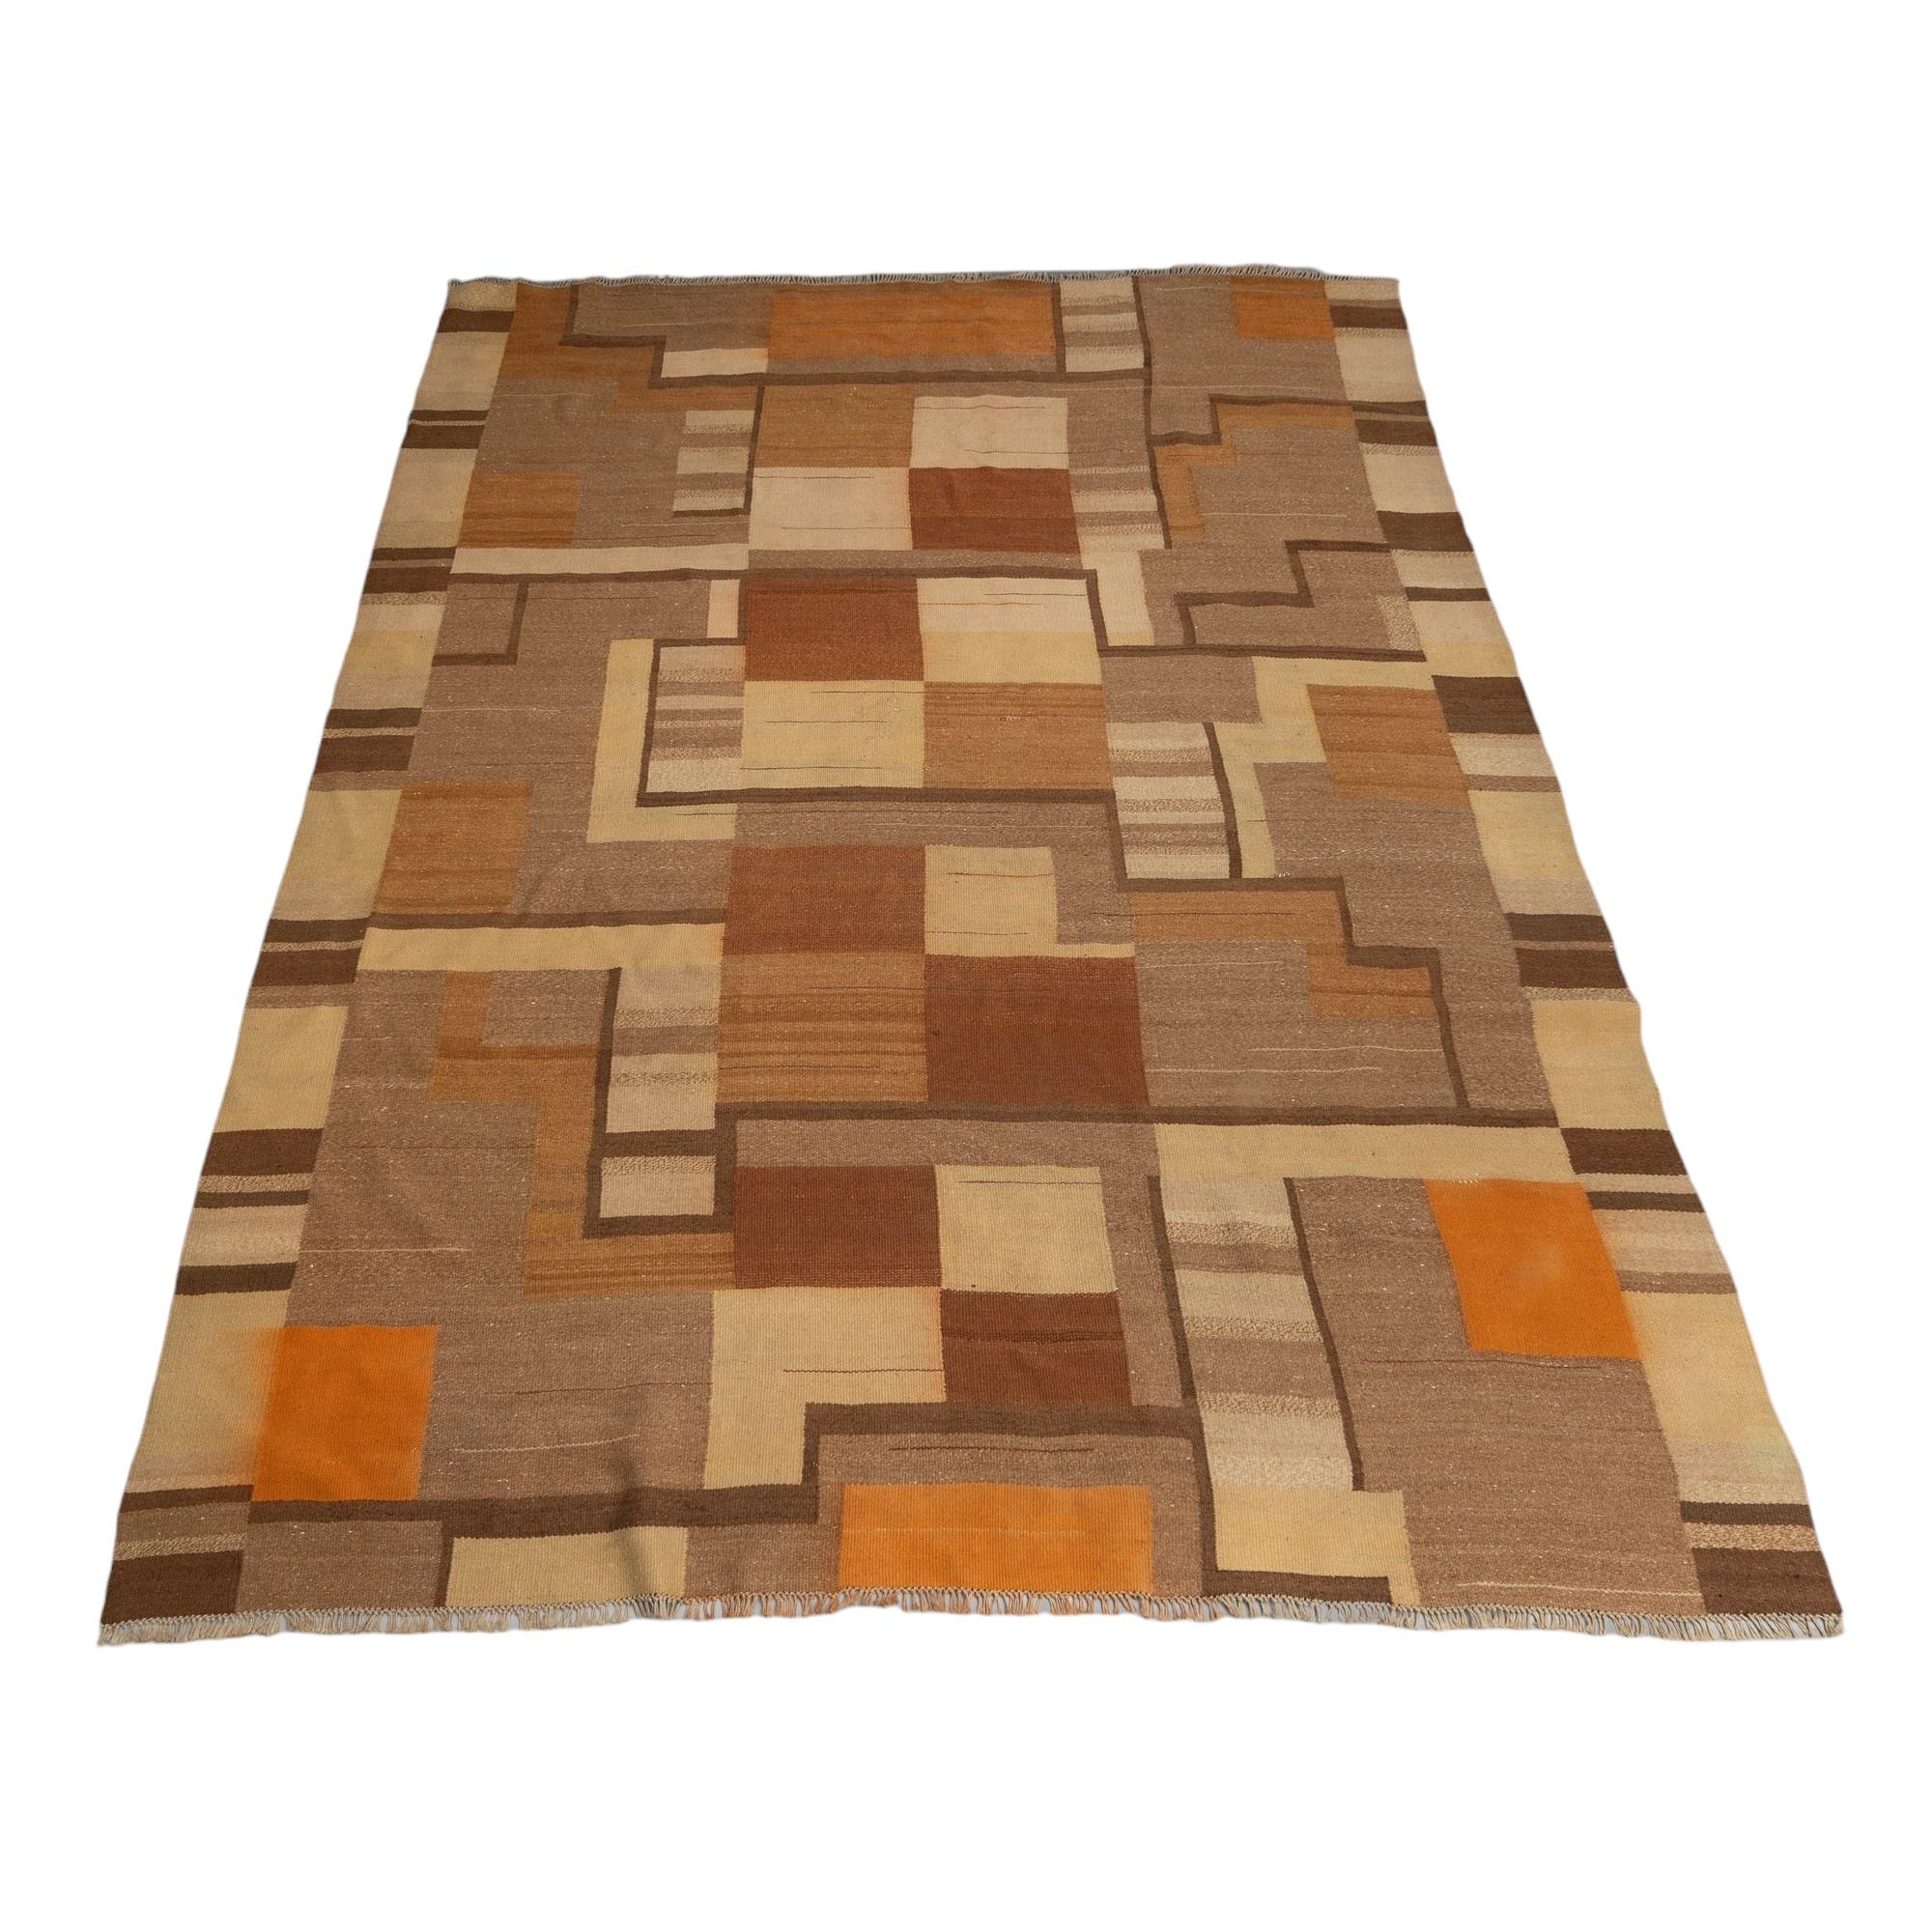 A beautiful functionalist period Finnish flat weave carpet. Hand made in the 1930s with great resemblance to or possibly by the renowned Finnish textile artist Greta Skogster-Lehtinen. 

The rug is sizable at 250x300 and is in good condition